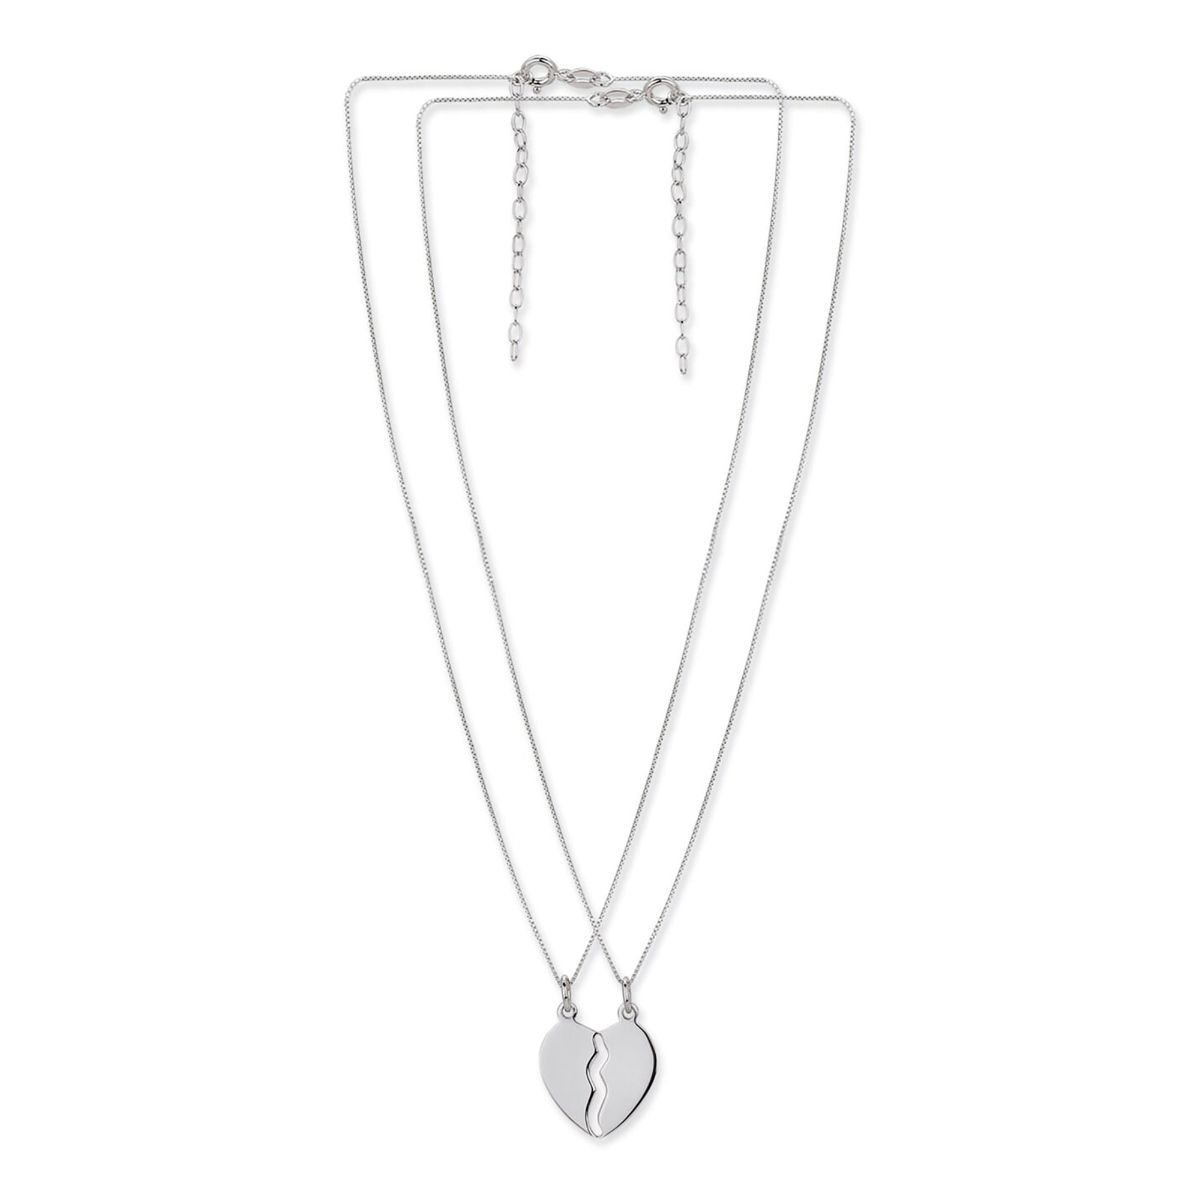 King Ice Broken Heart Necklace | Urban Outfitters Mexico - Clothing, Music,  Home & Accessories